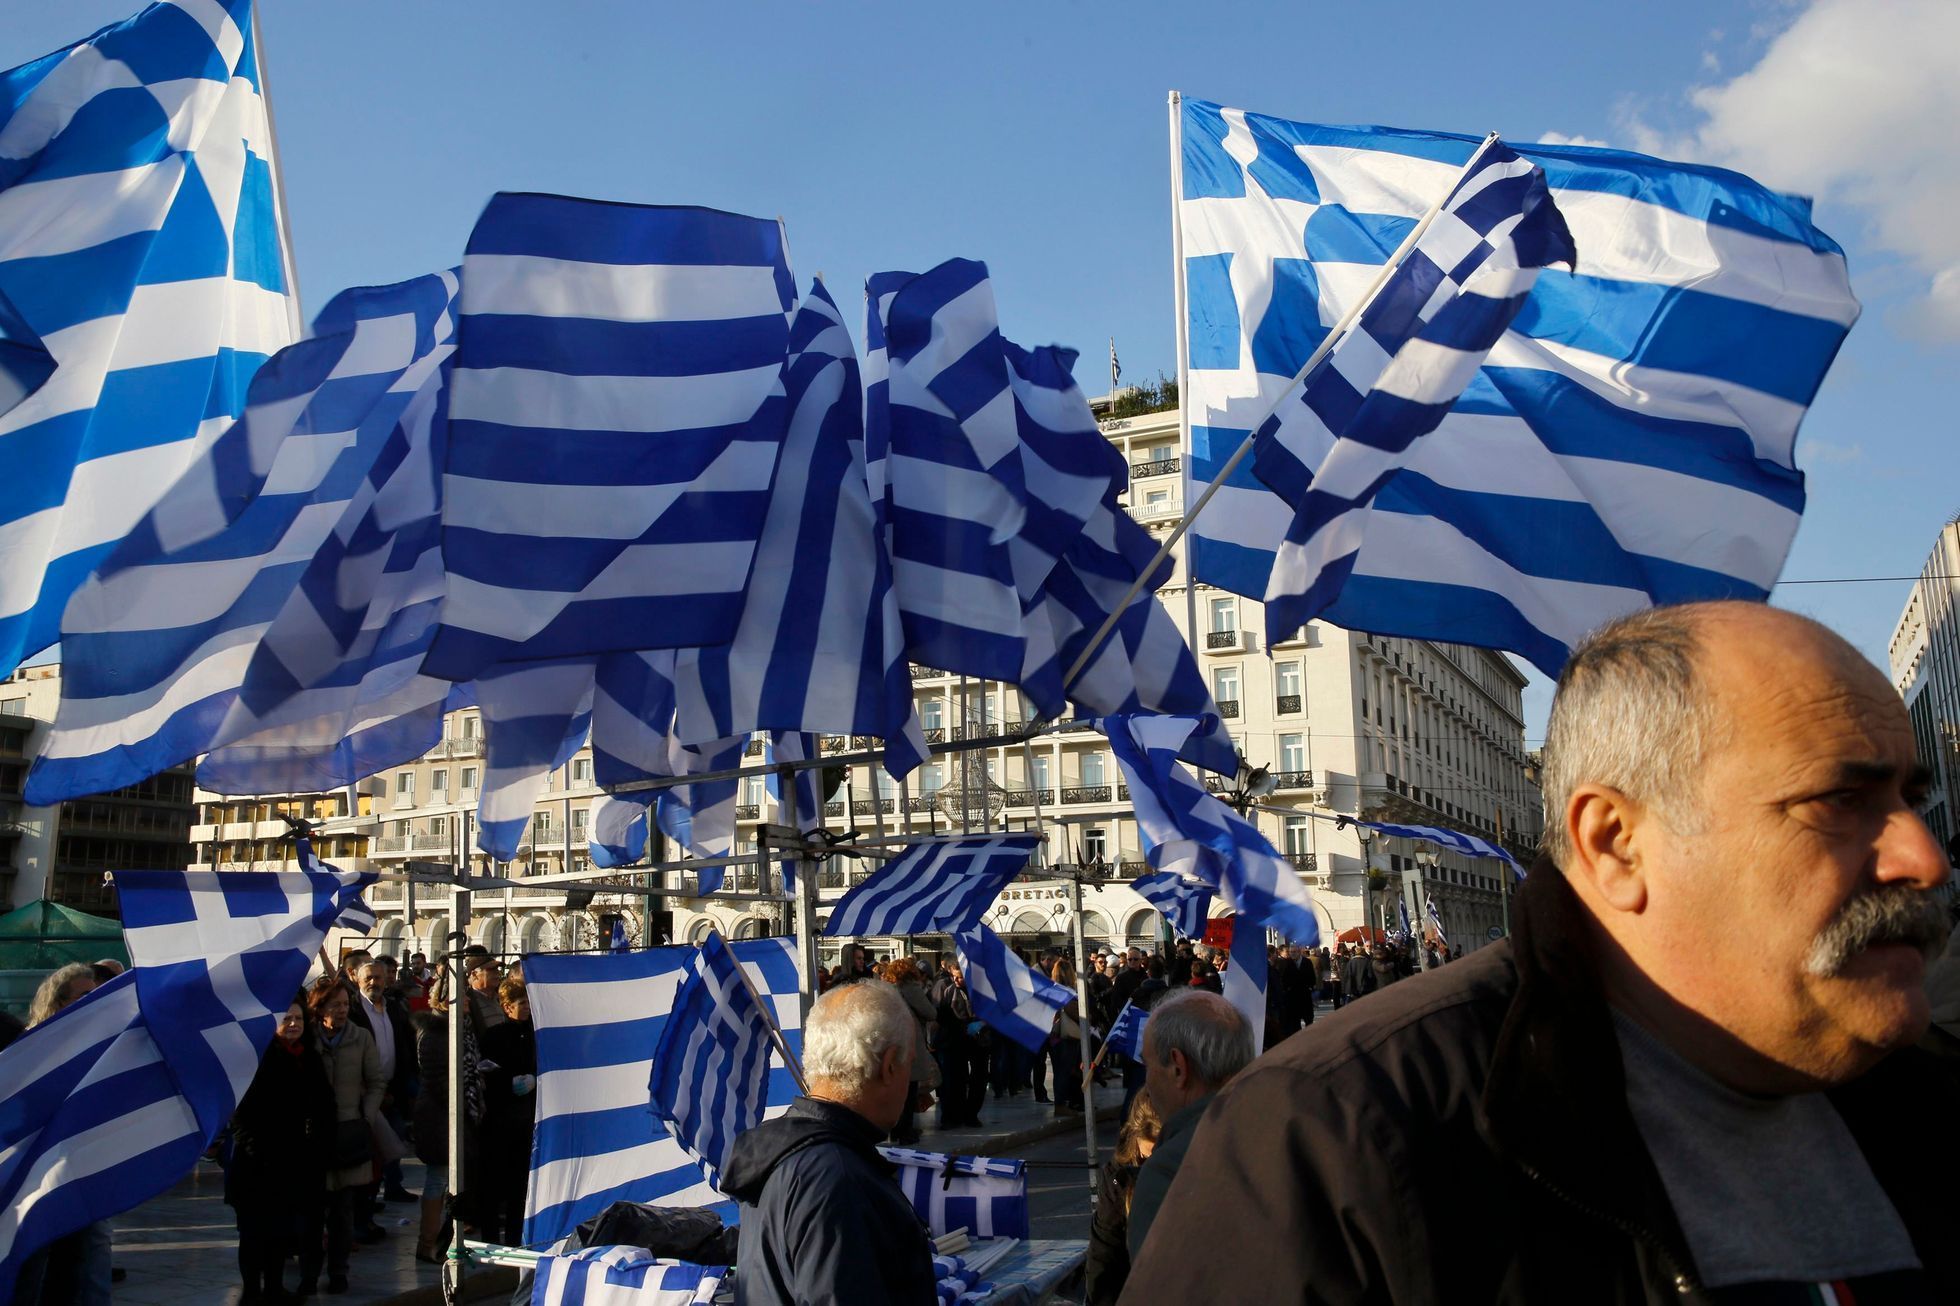 Greek national flags displayed for sale flutter during an anti-austerity pro-government demonstration in front of the parliament in Athens